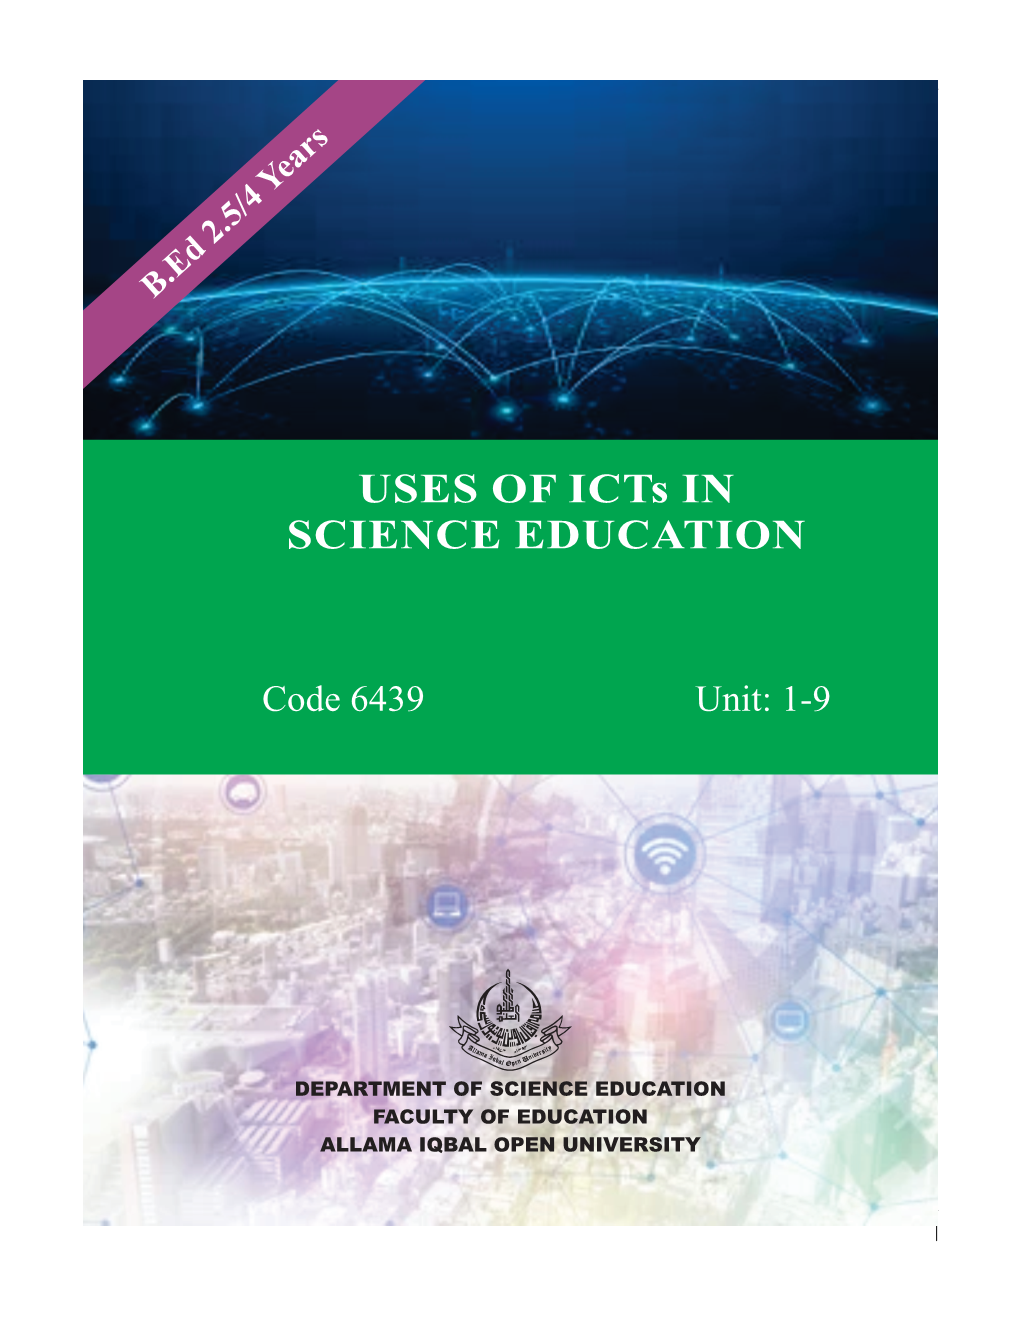 USES of Icts in SCIENCE EDUCATION